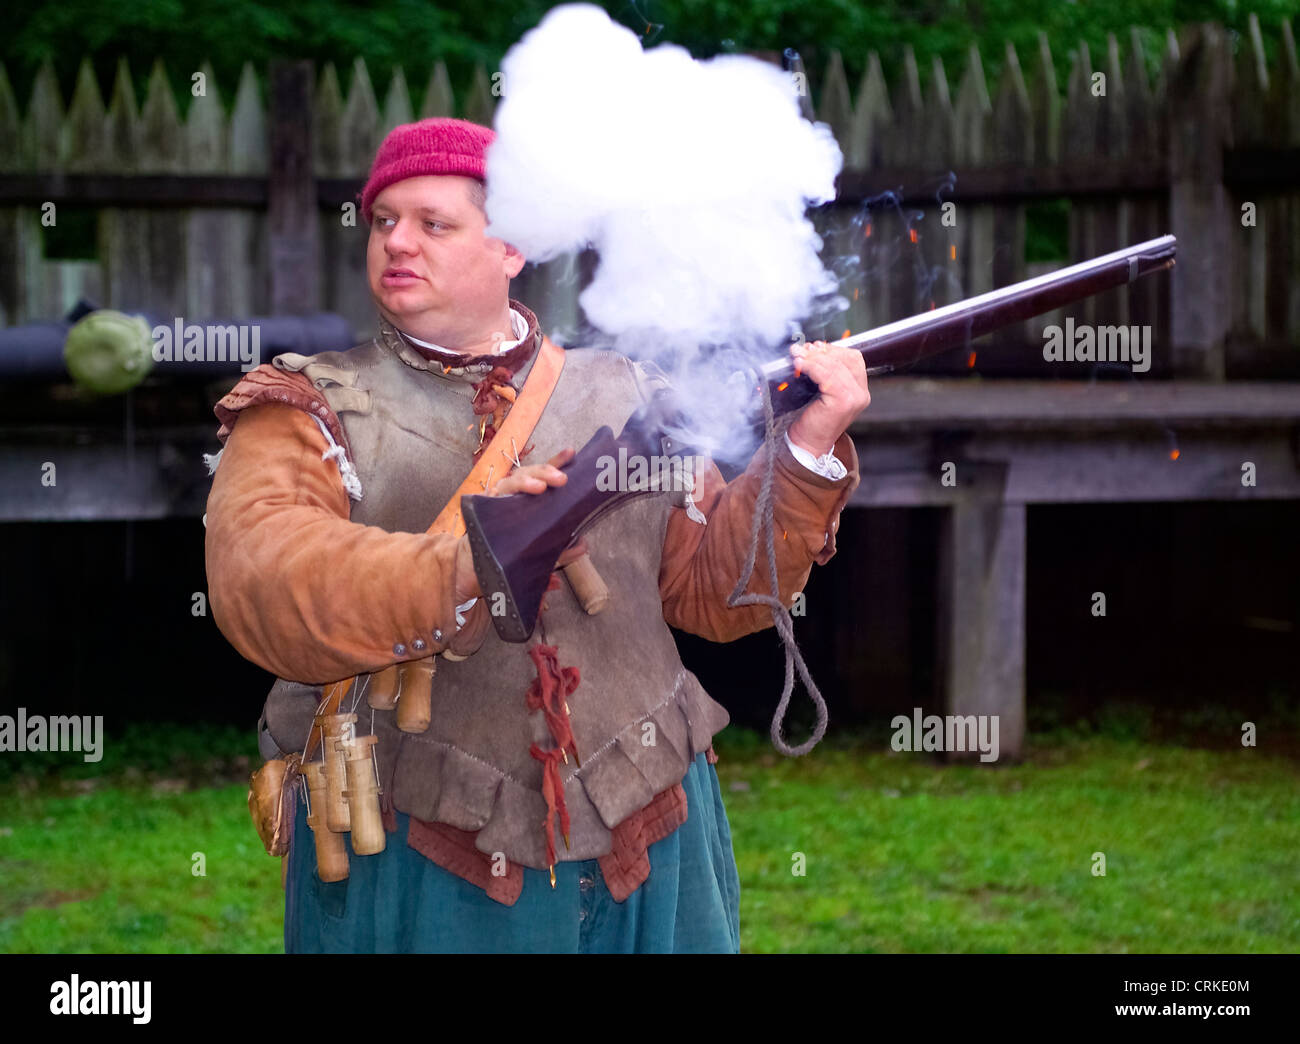 A historical interpreter fires a matchlock musket after demonstrating how to load the weapon with gunpowder at Jamestown Settlement in Virginia, USA. Stock Photo